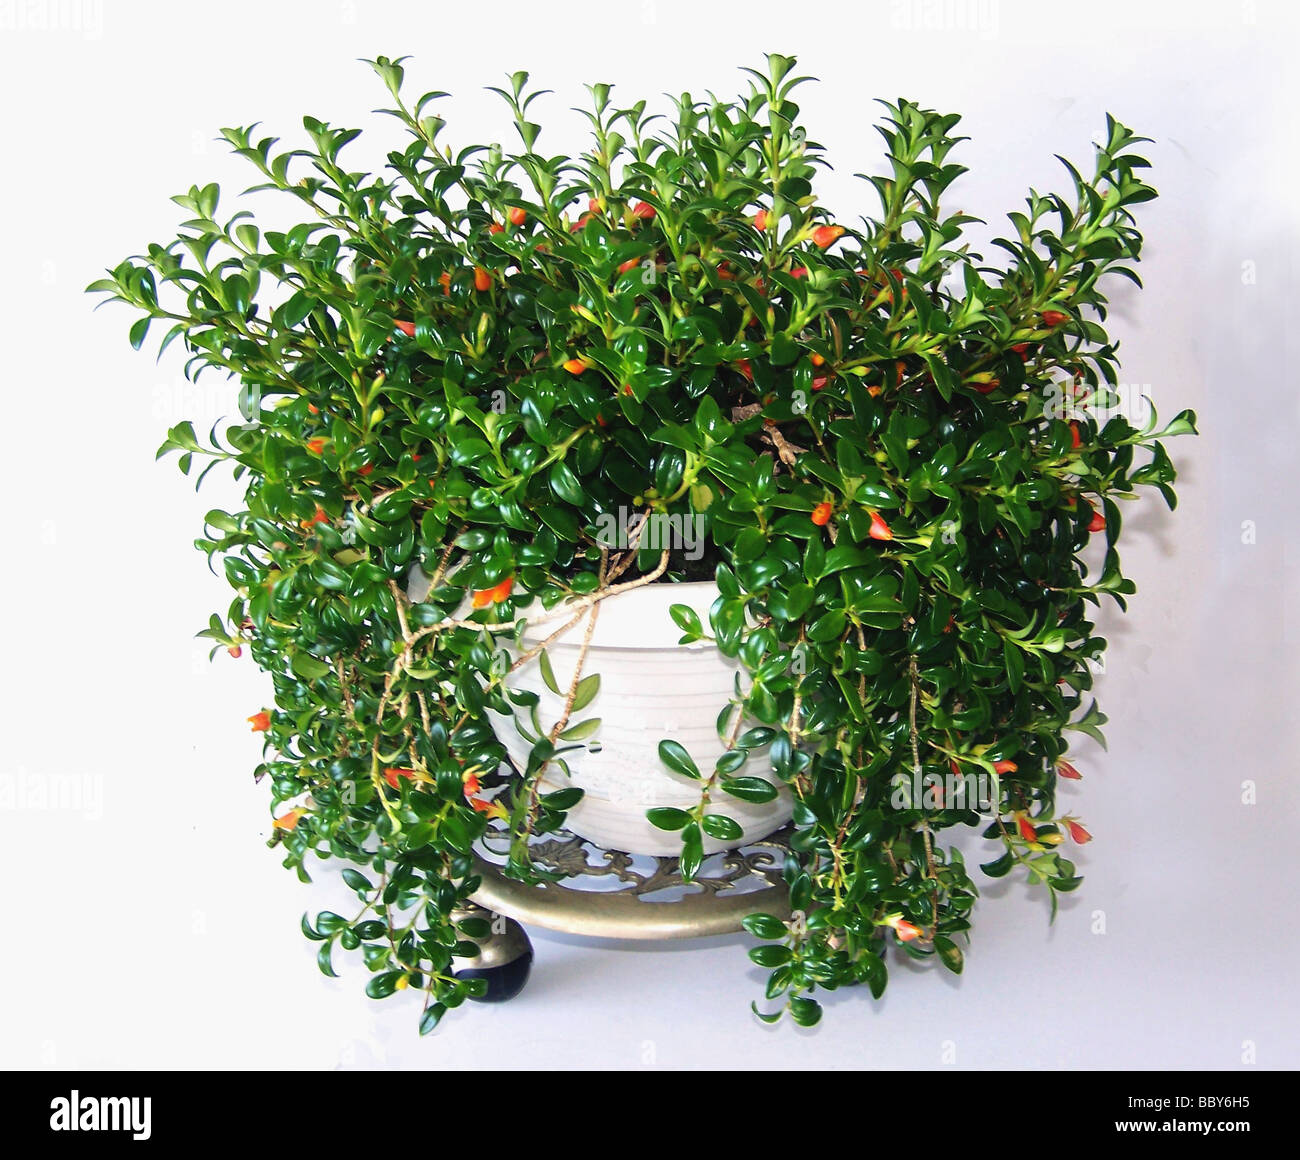 Goldfish house plant is a flowering plant from the family Columnea Gesneriaceae. Stock Photo